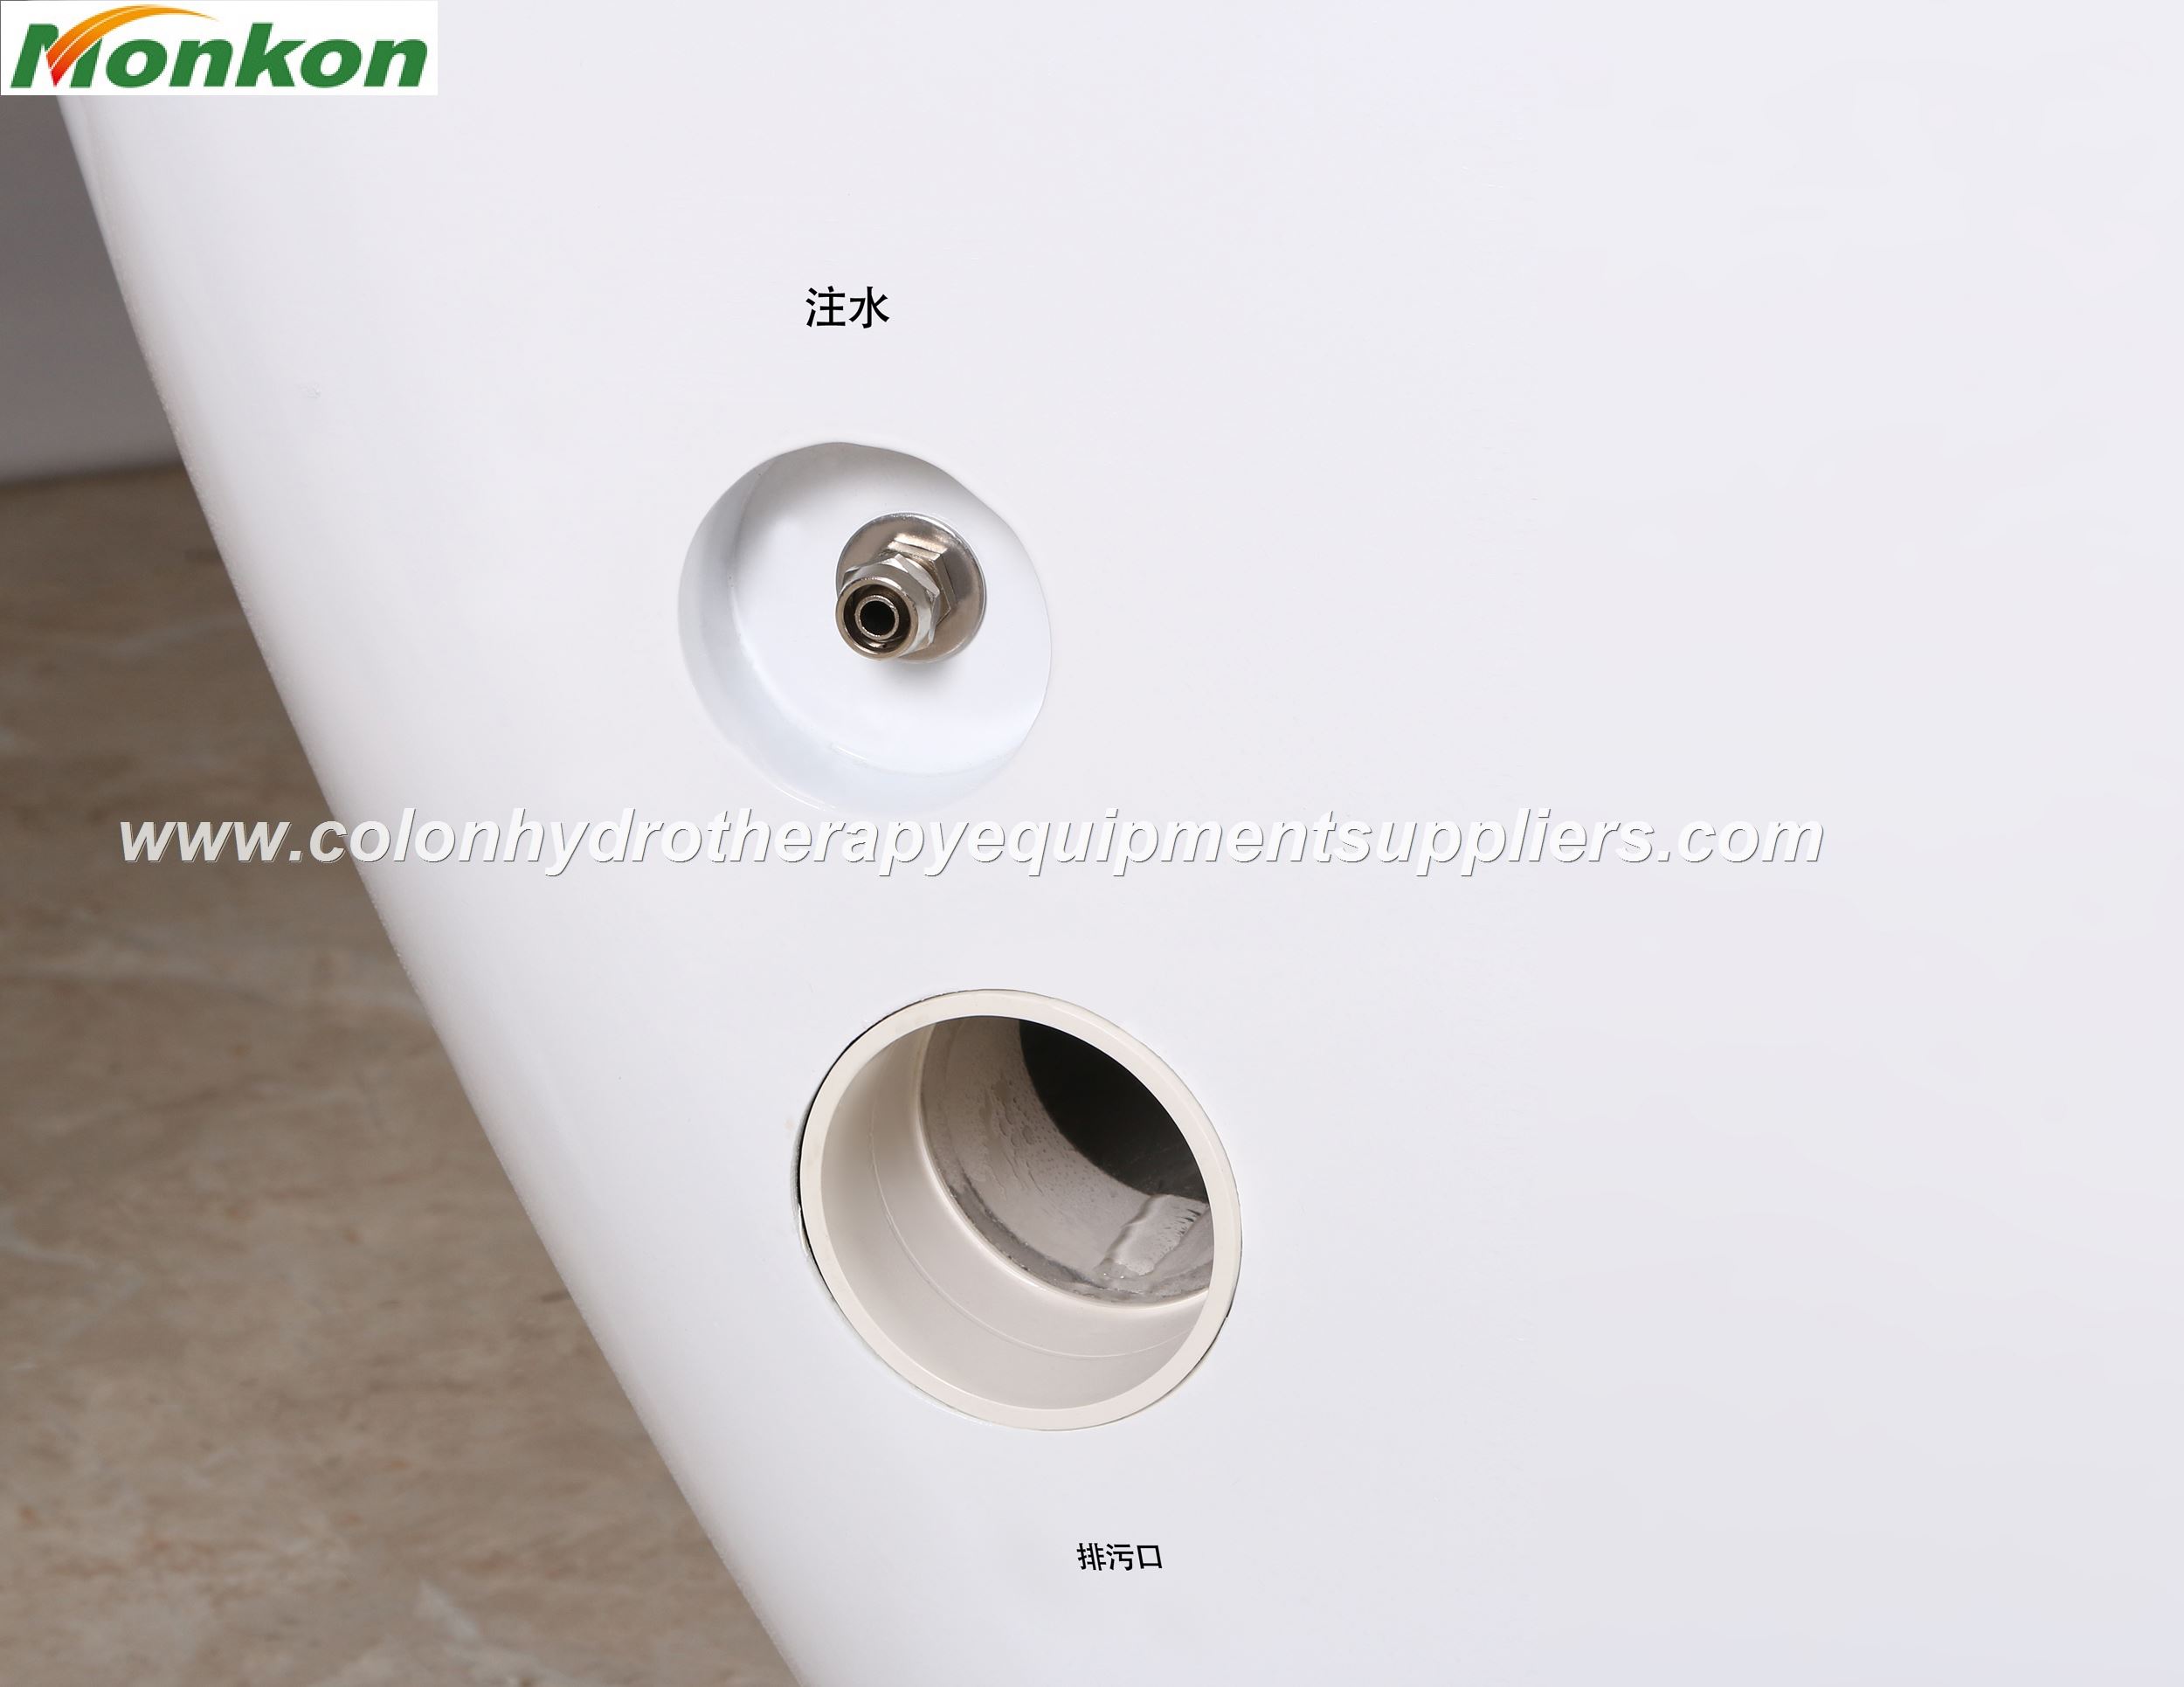 Professional Colon Hydrotherapy Equipment